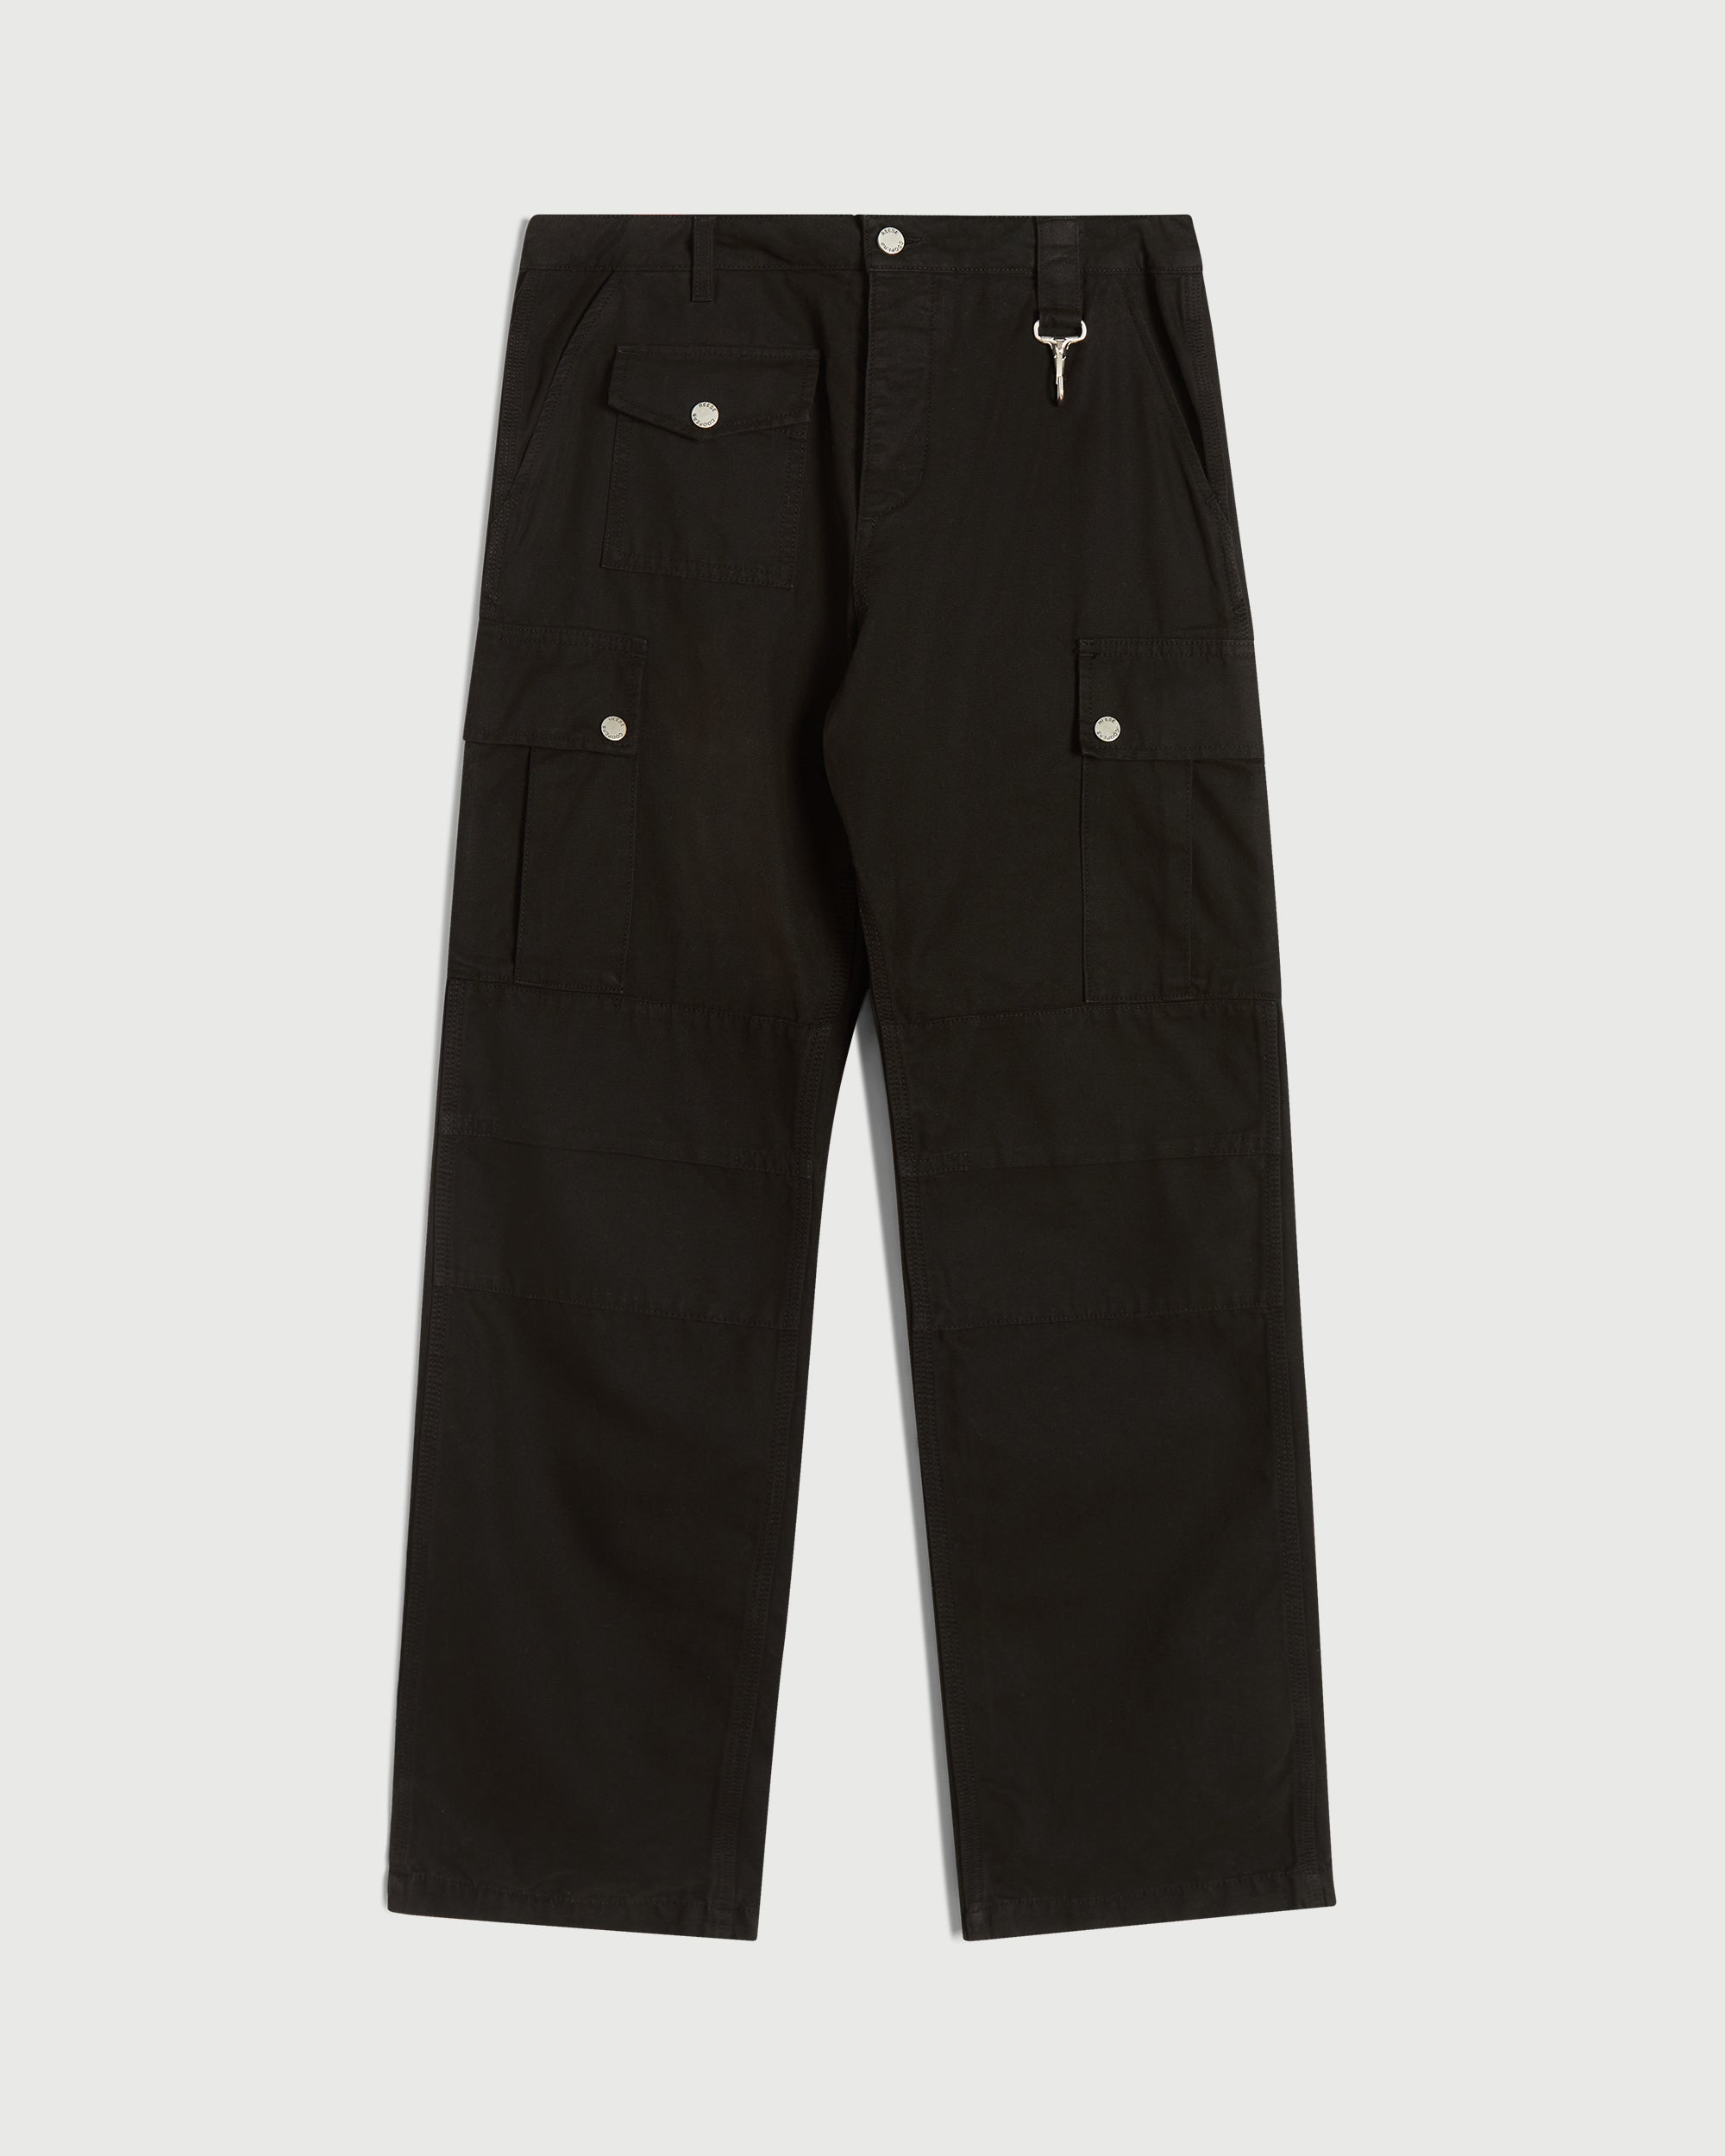 Reese COOPER® Garment Dyed Cargo Pant in Black 36